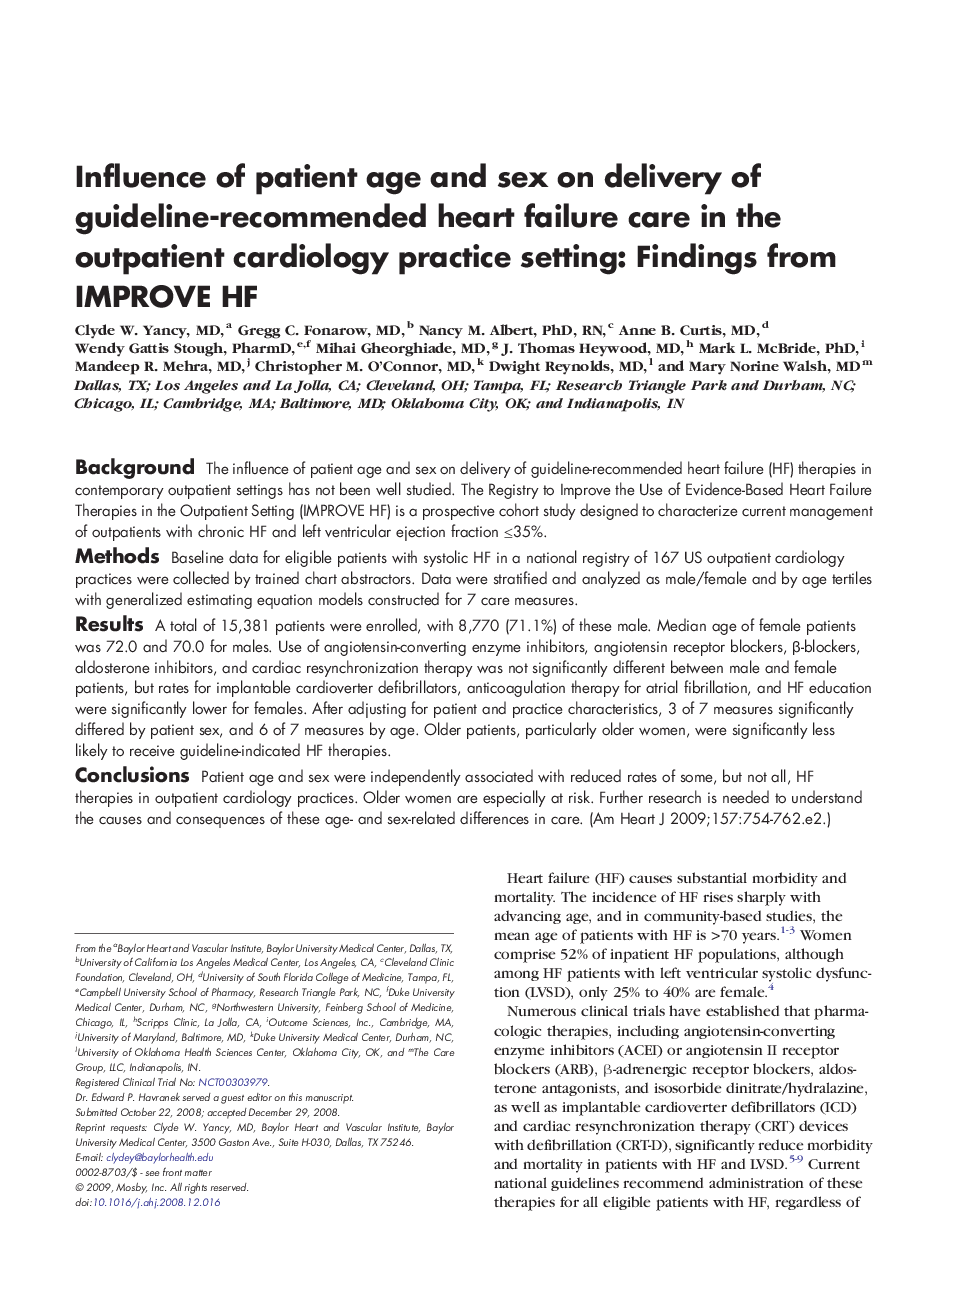 Influence of patient age and sex on delivery of guideline-recommended heart failure care in the outpatient cardiology practice setting: Findings from IMPROVE HF